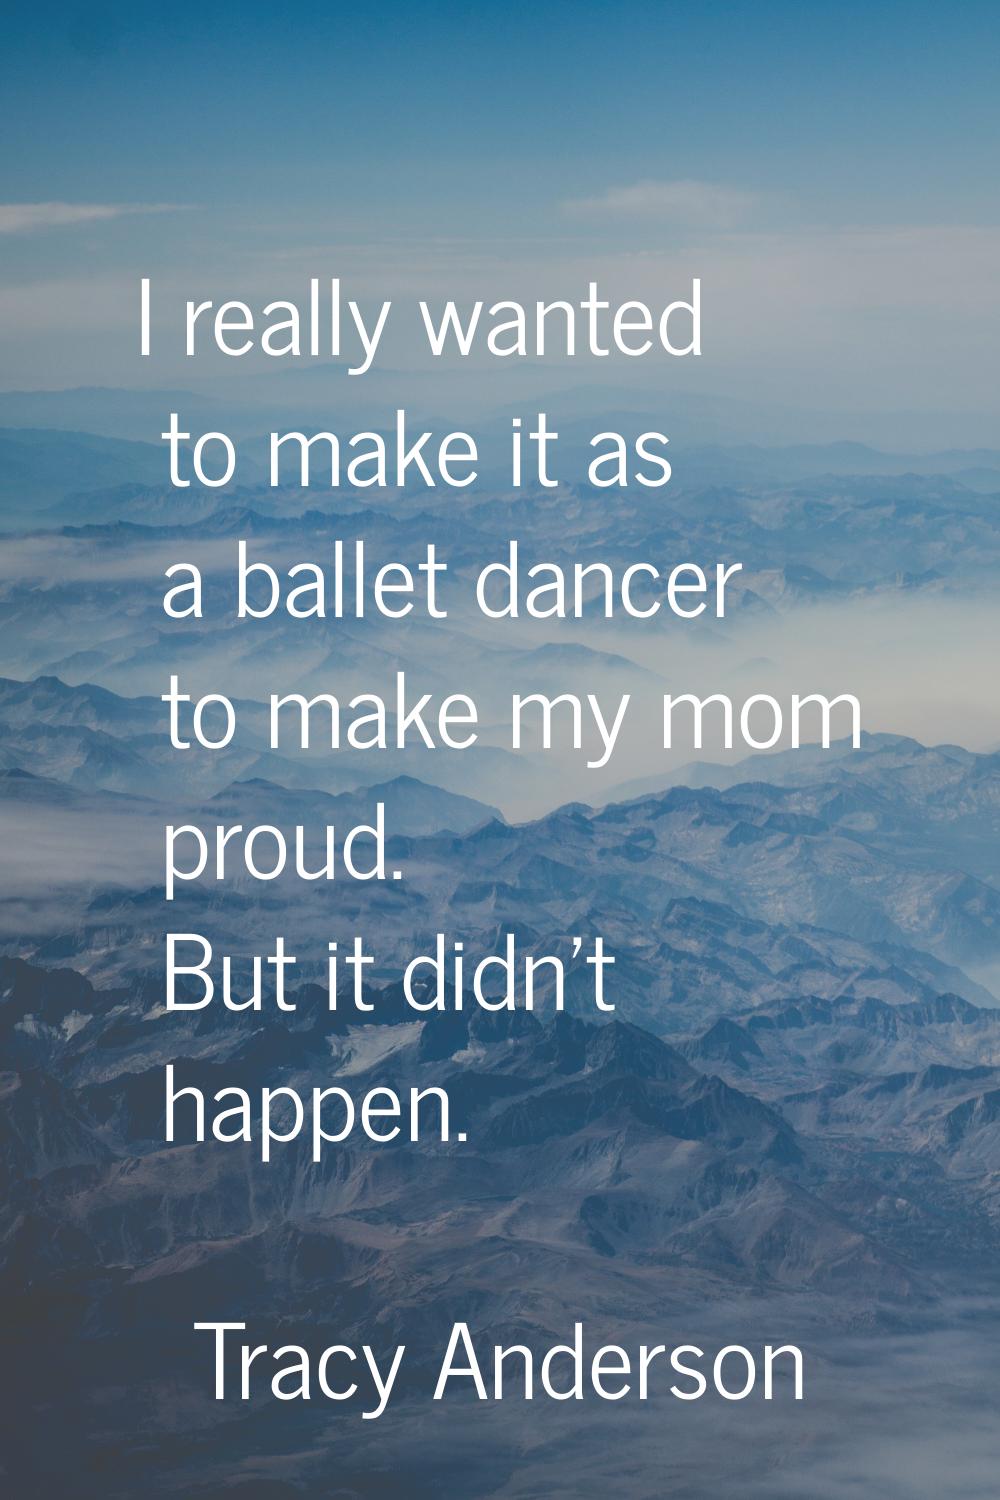 I really wanted to make it as a ballet dancer to make my mom proud. But it didn't happen.